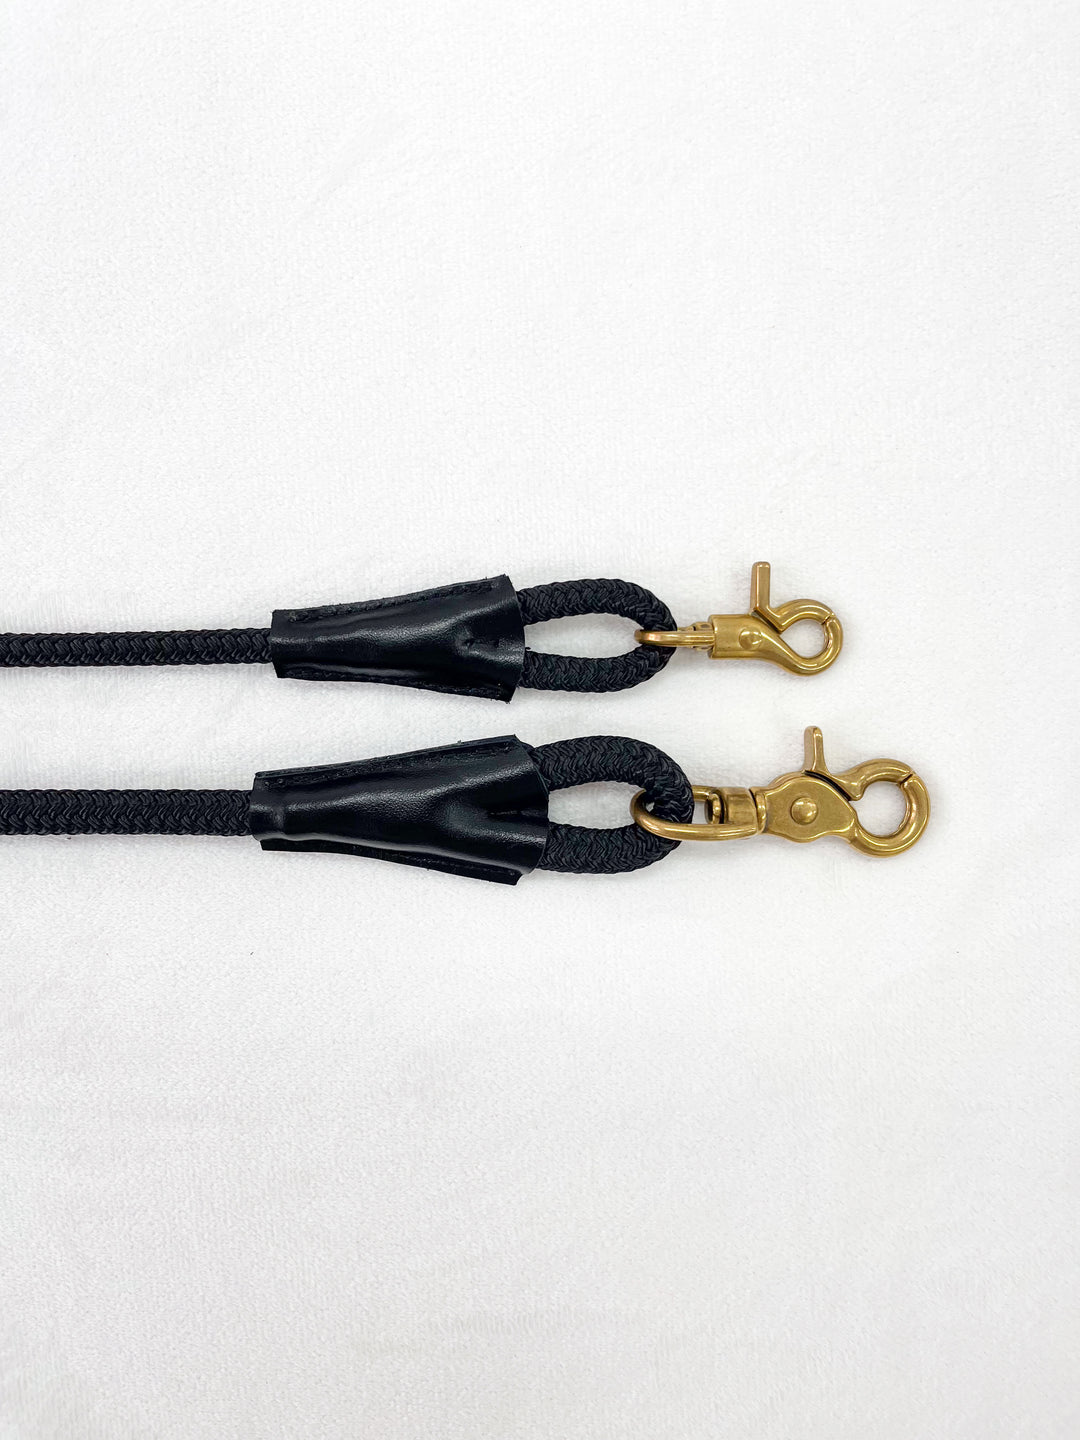 Signature Rope Dog Leash with Leather & Brass Fitting | Jet Black